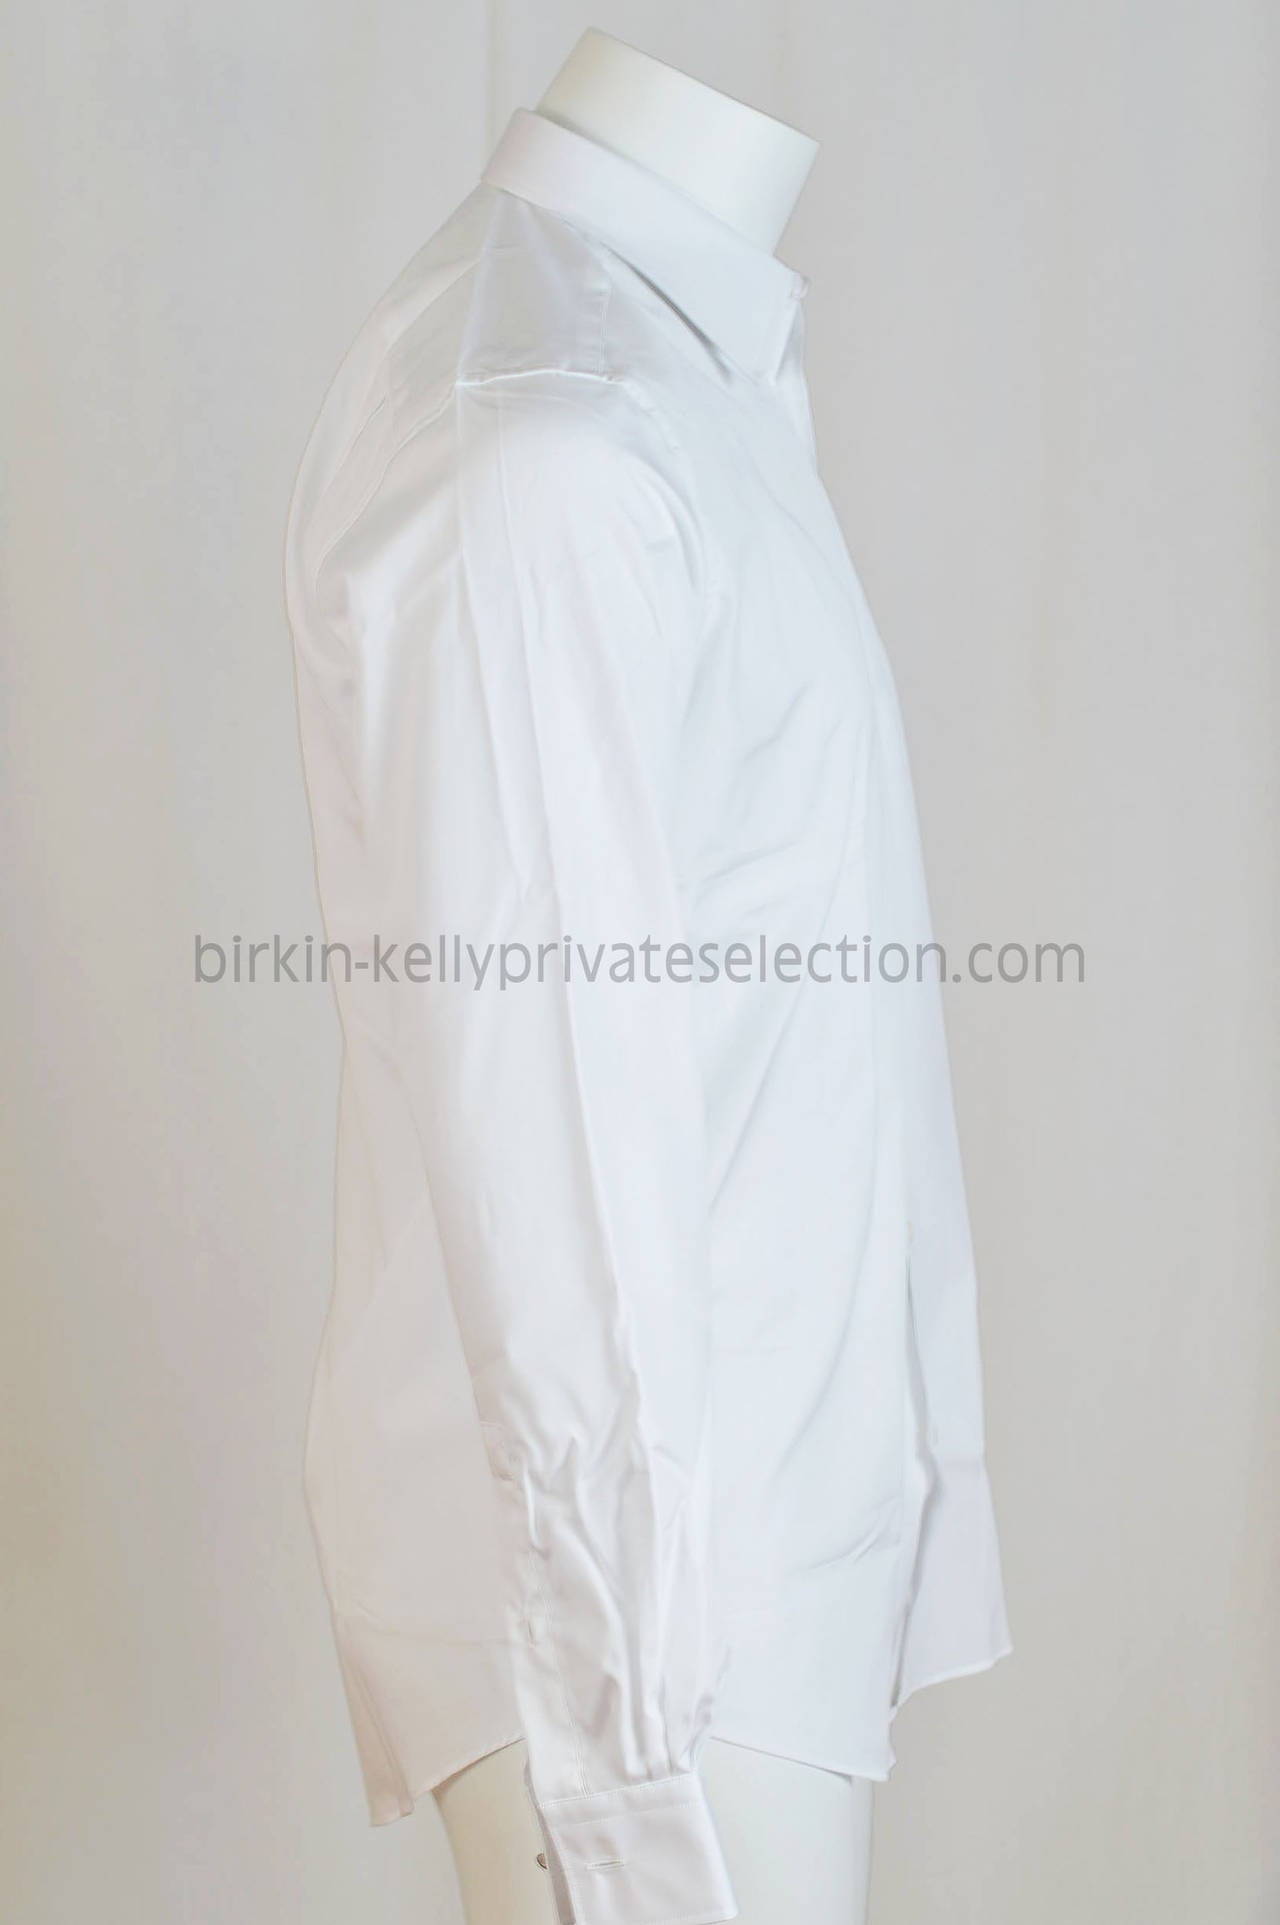 HERMES Shirt AJUSTE COL DROITE Cotton 40 WHITE 2015.

Pre-owned and never used.

Bought it in Hermes store in 2015.

Composition; 100% Cotton.

Size; 40.

Color; BLANC.

Model; AJUSTE COL DROITE.

-Original Invoice.

-Shipment and